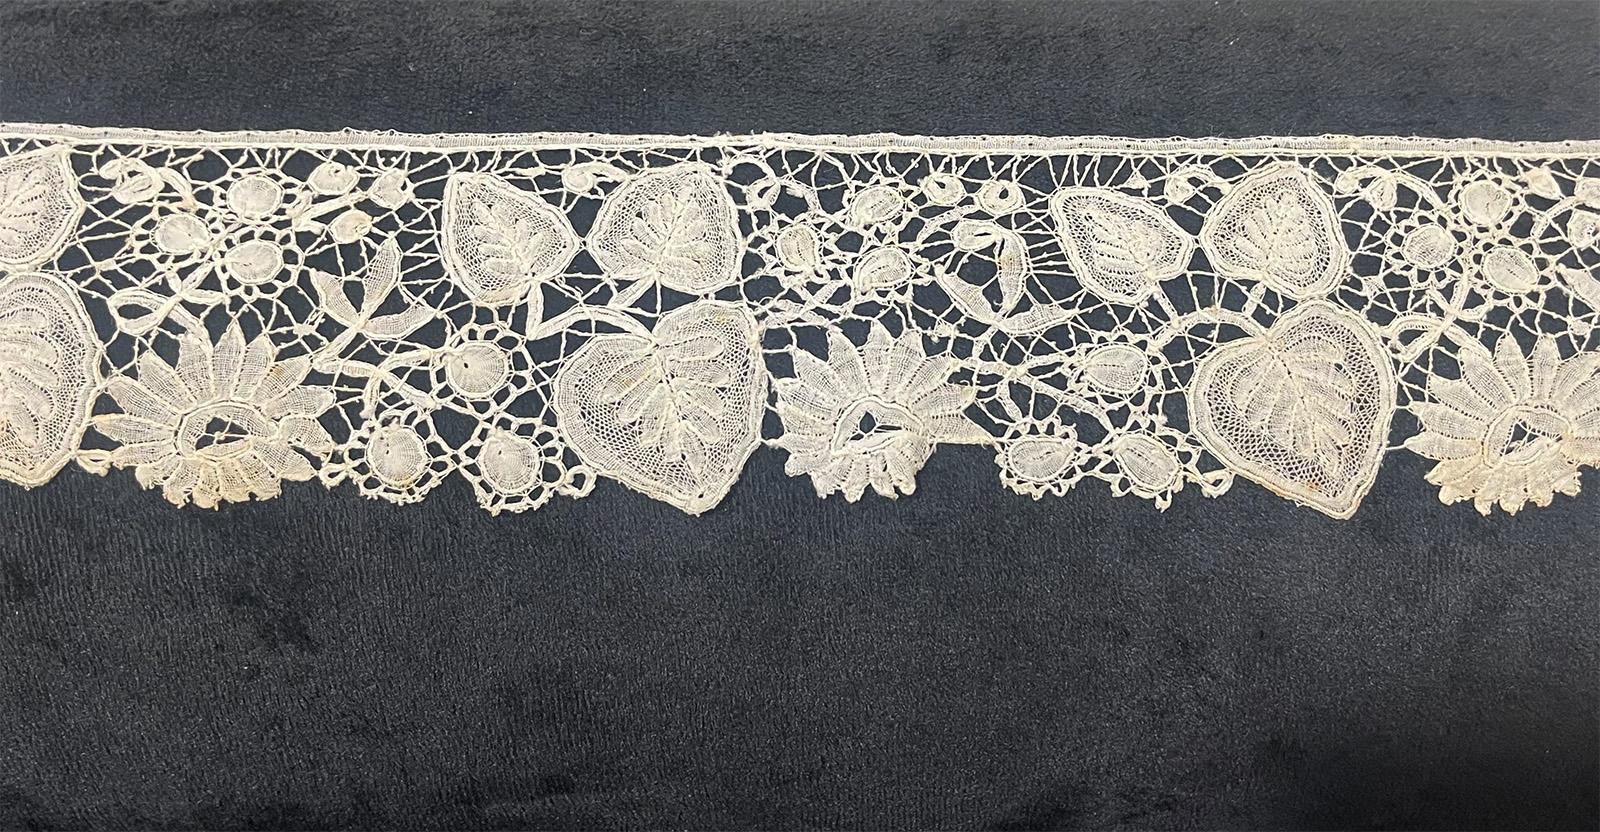 19th Century Duchesse Brussels lace border

A 19th Century Brussels, Duchesse lace border with leaves and flowers. This small piece measures 102 cm long. It is a cream colored lace and has not been used, but does show some slight discolourations.